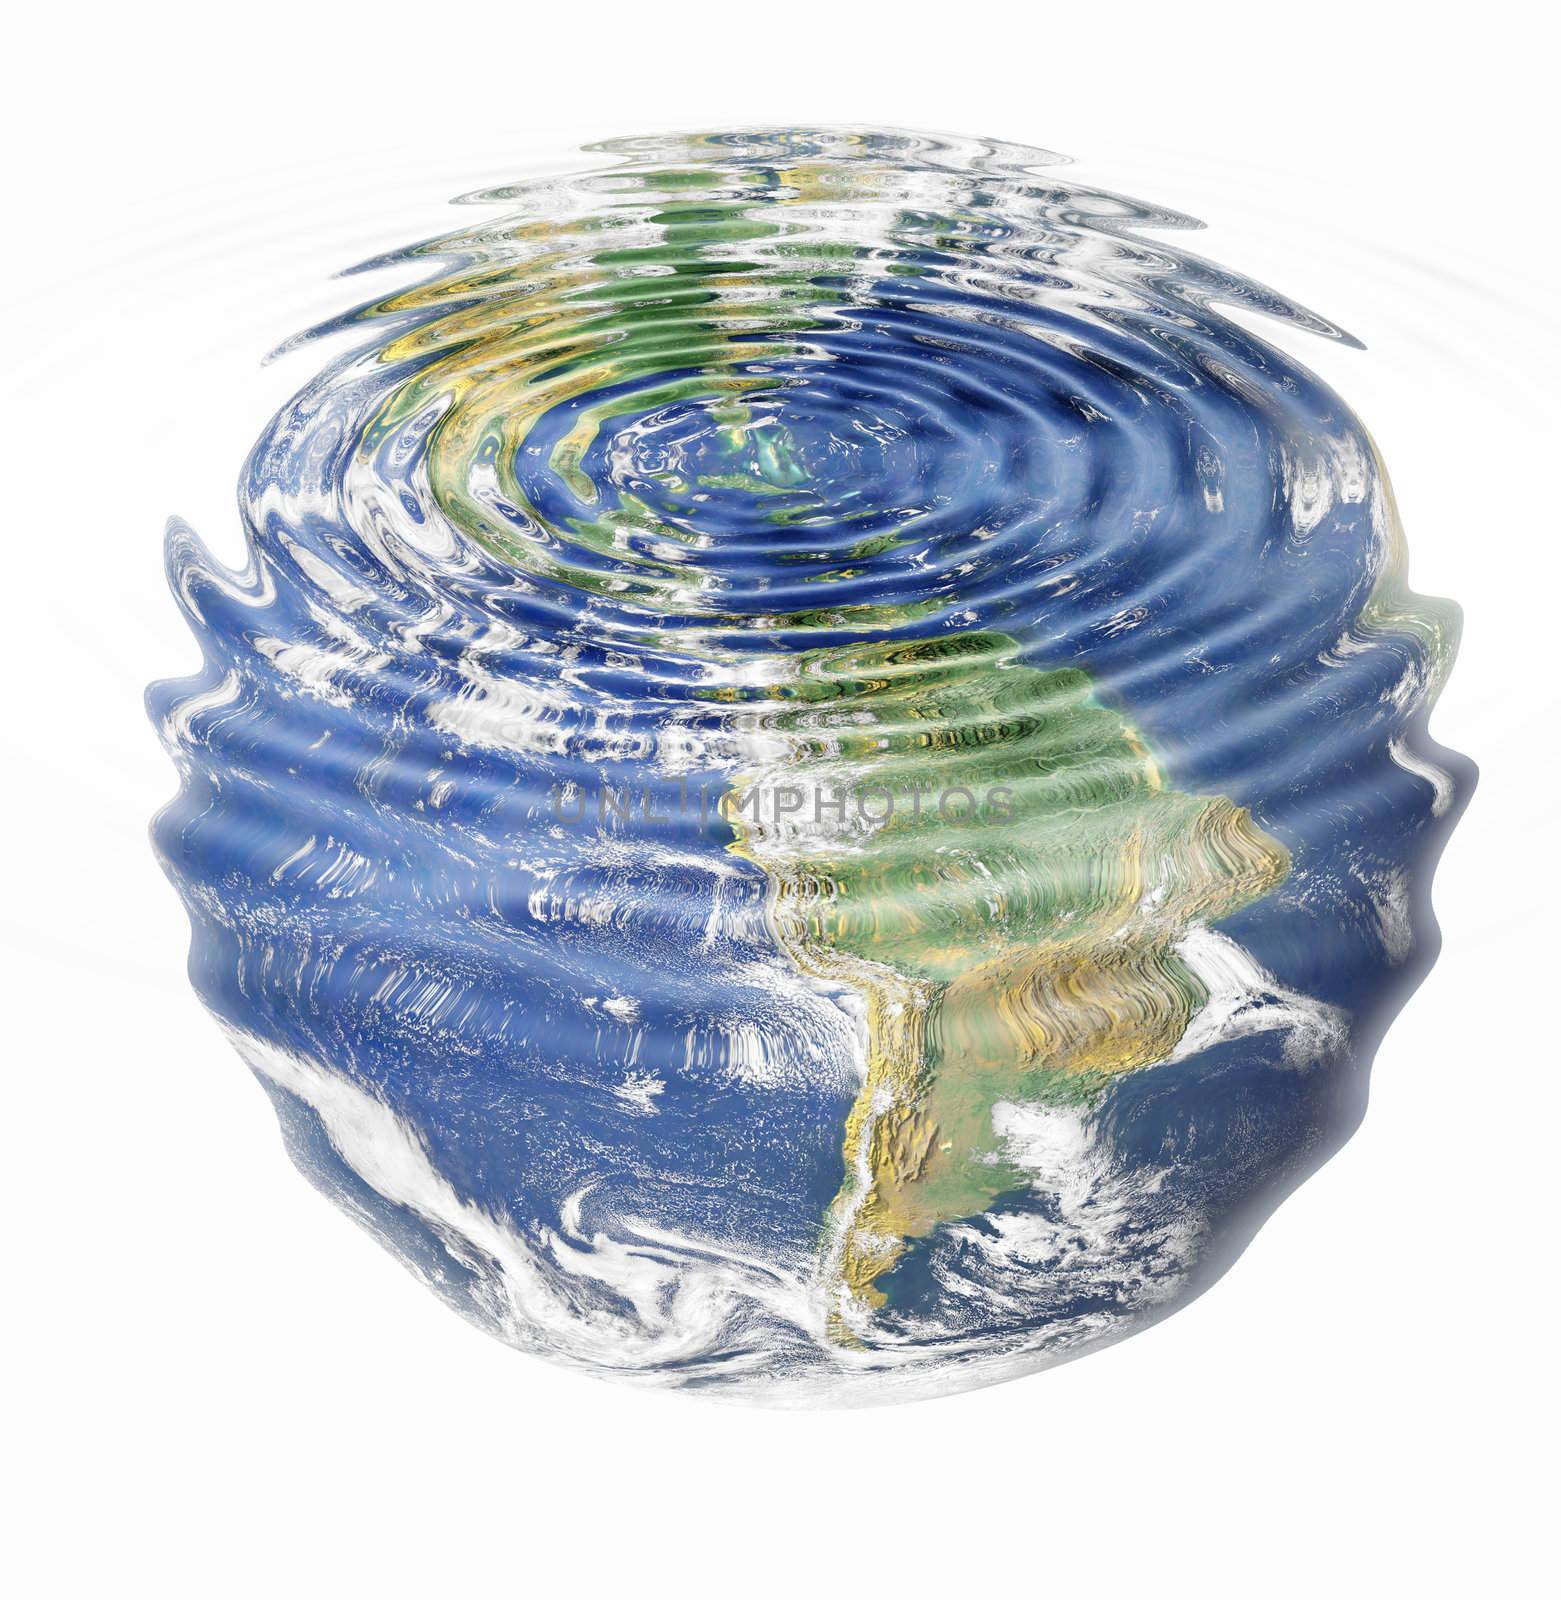 water ripples and earth image (American Continent) combined, environmental, global warming concept